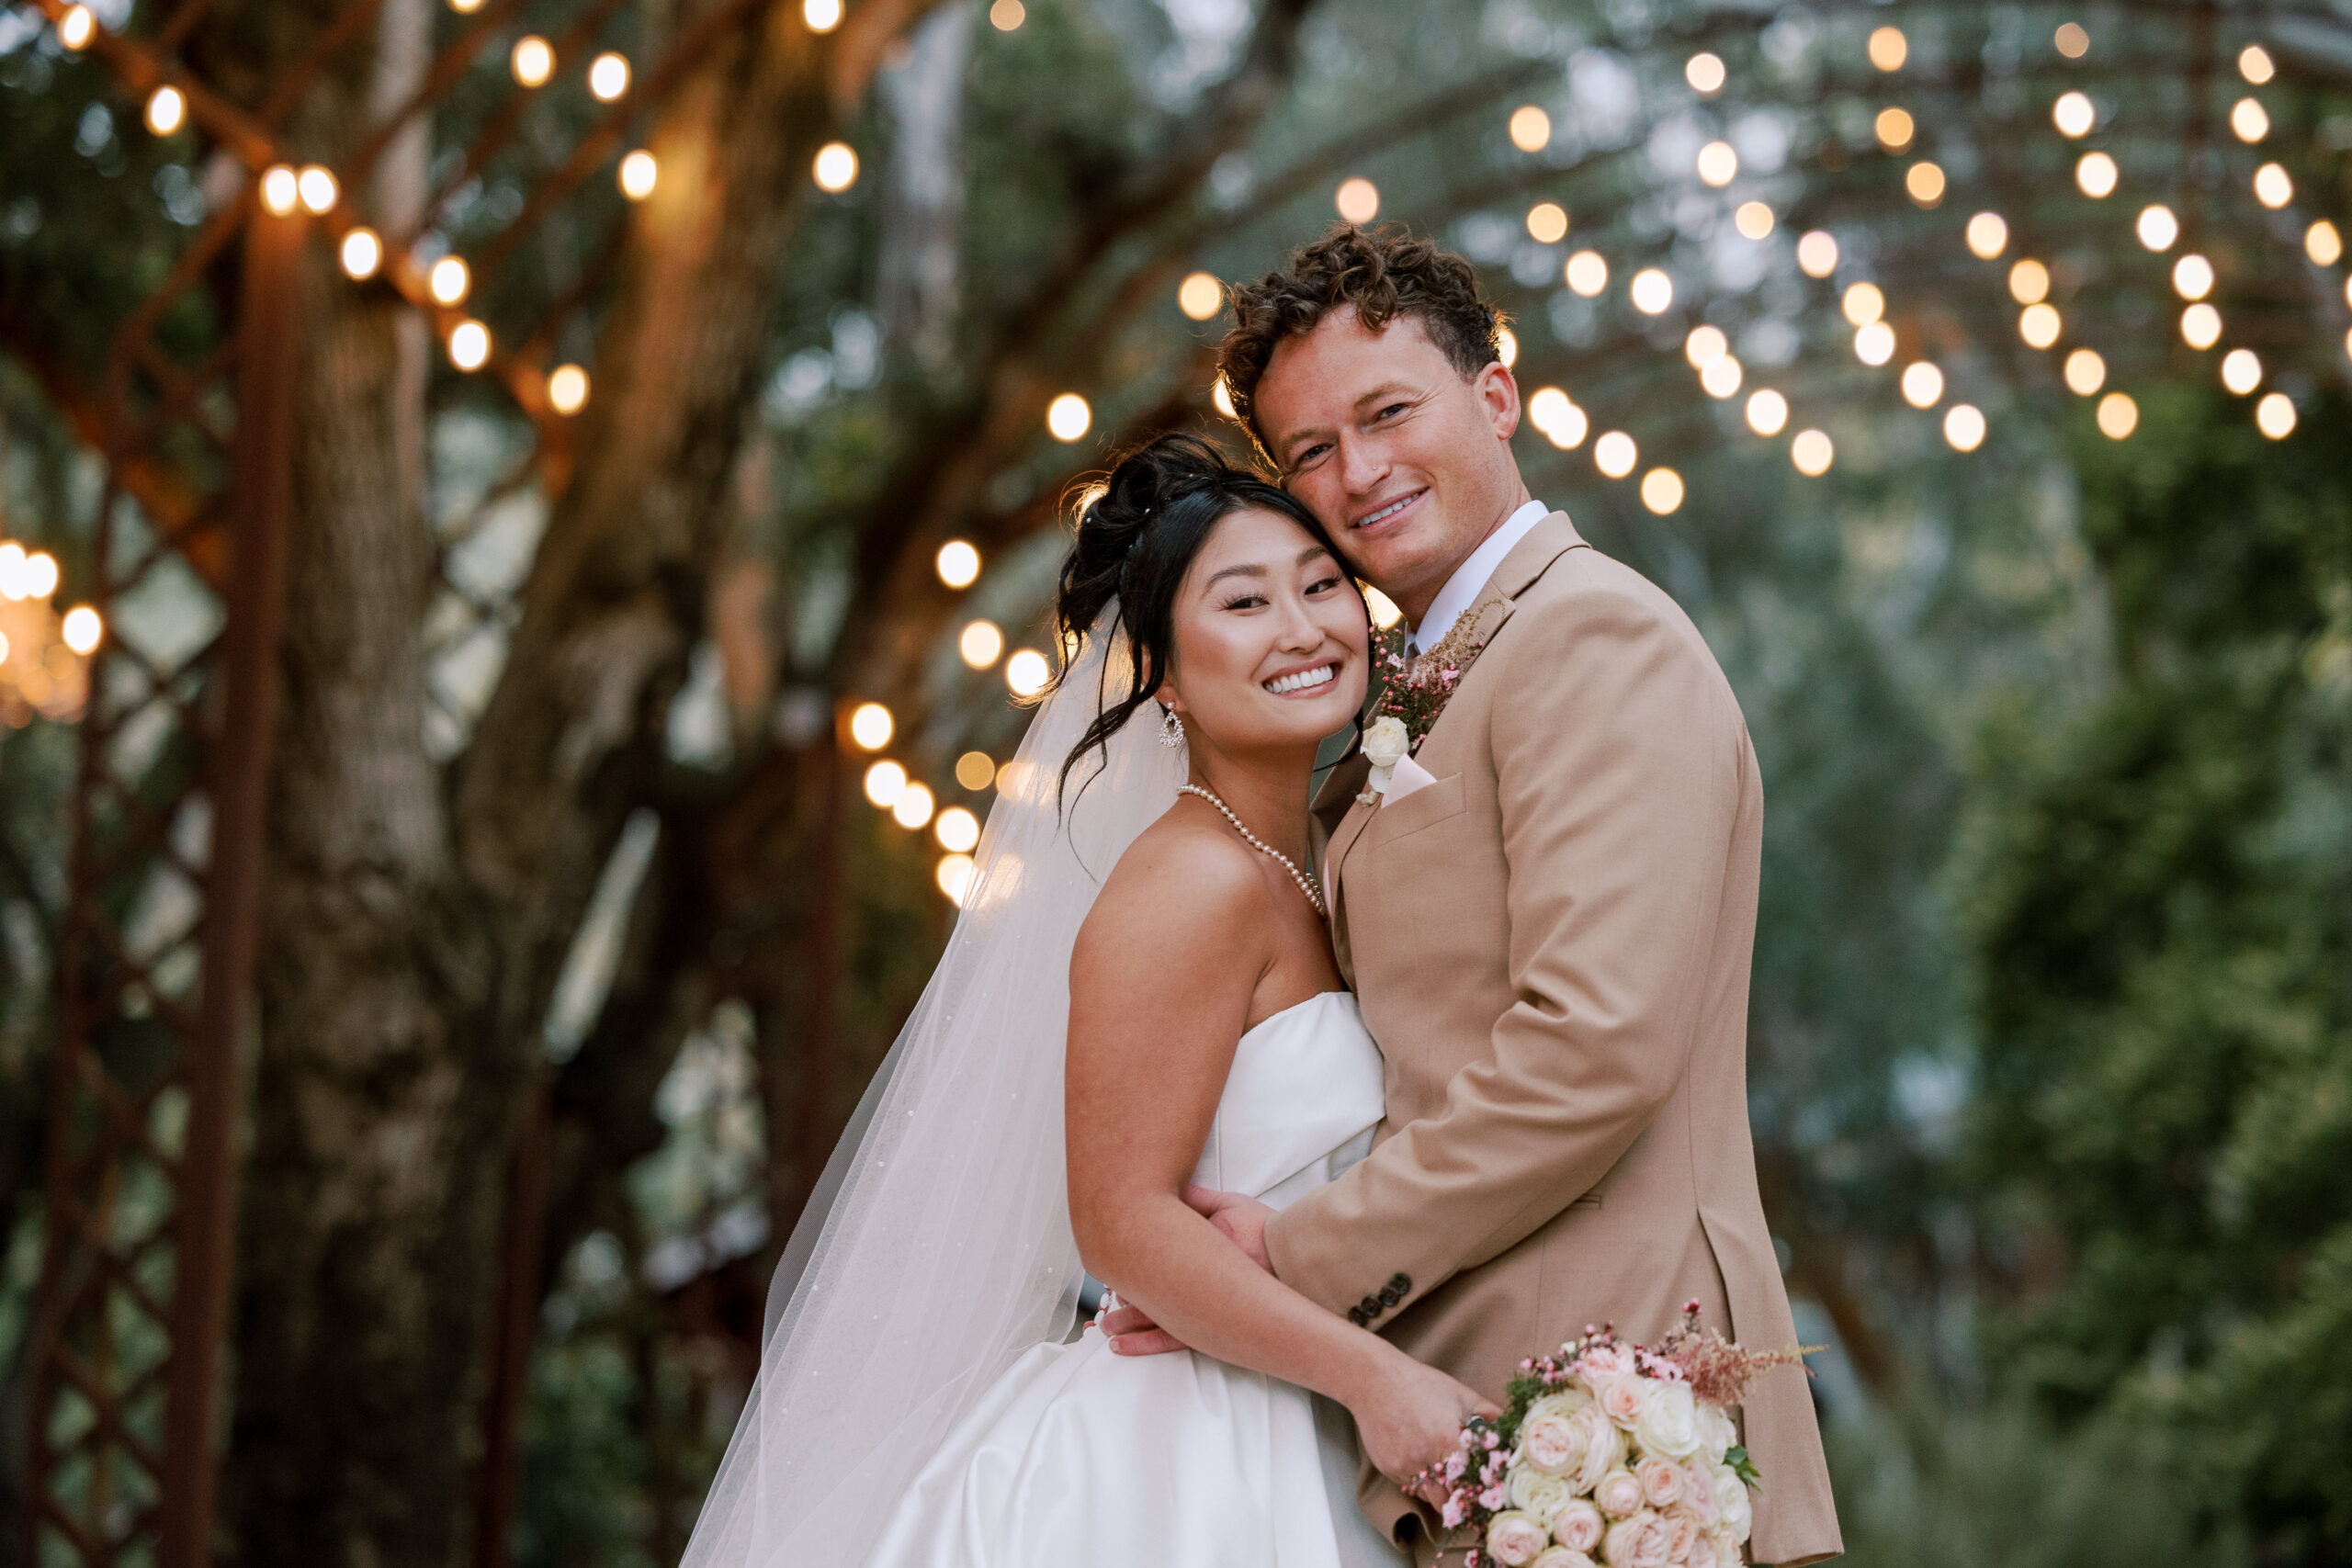 Groom wearing a tan suit hugging his bride holding a blush pink bridal bouquet at Calamigos Ranch